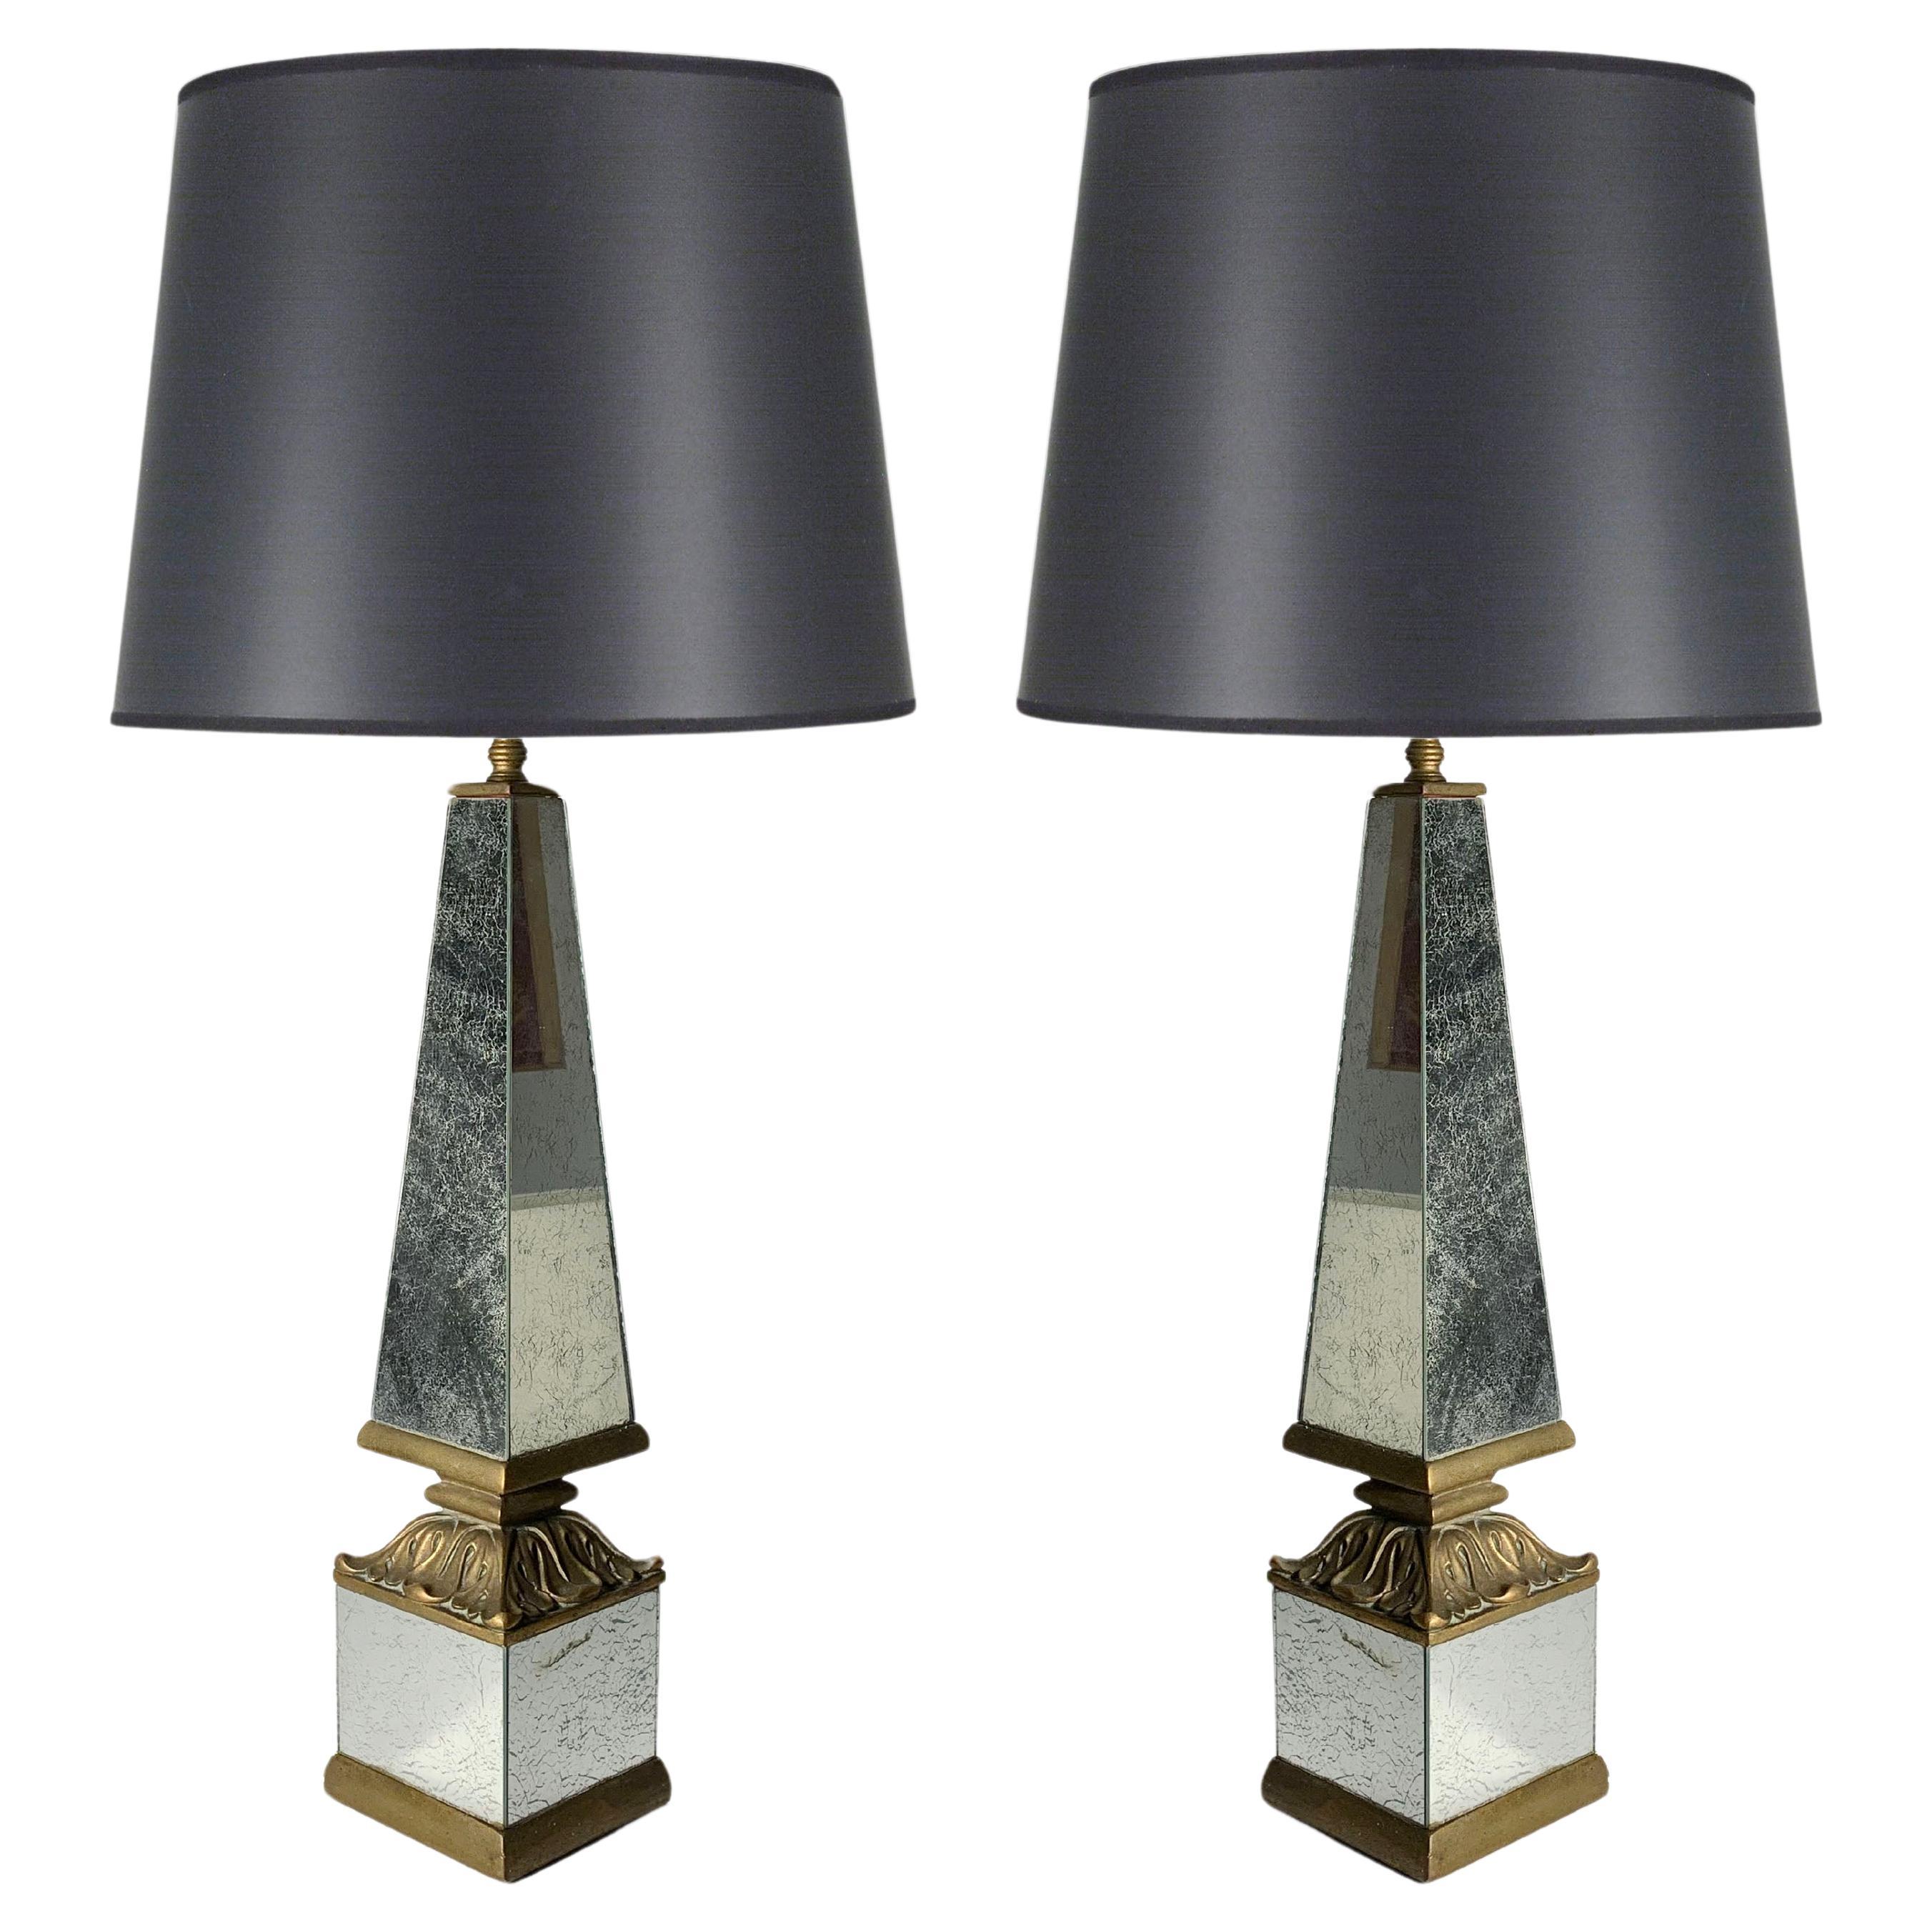 Pair of 1940s Hollywood Regency Mirrored Obelisk Form Table Lamps For Sale